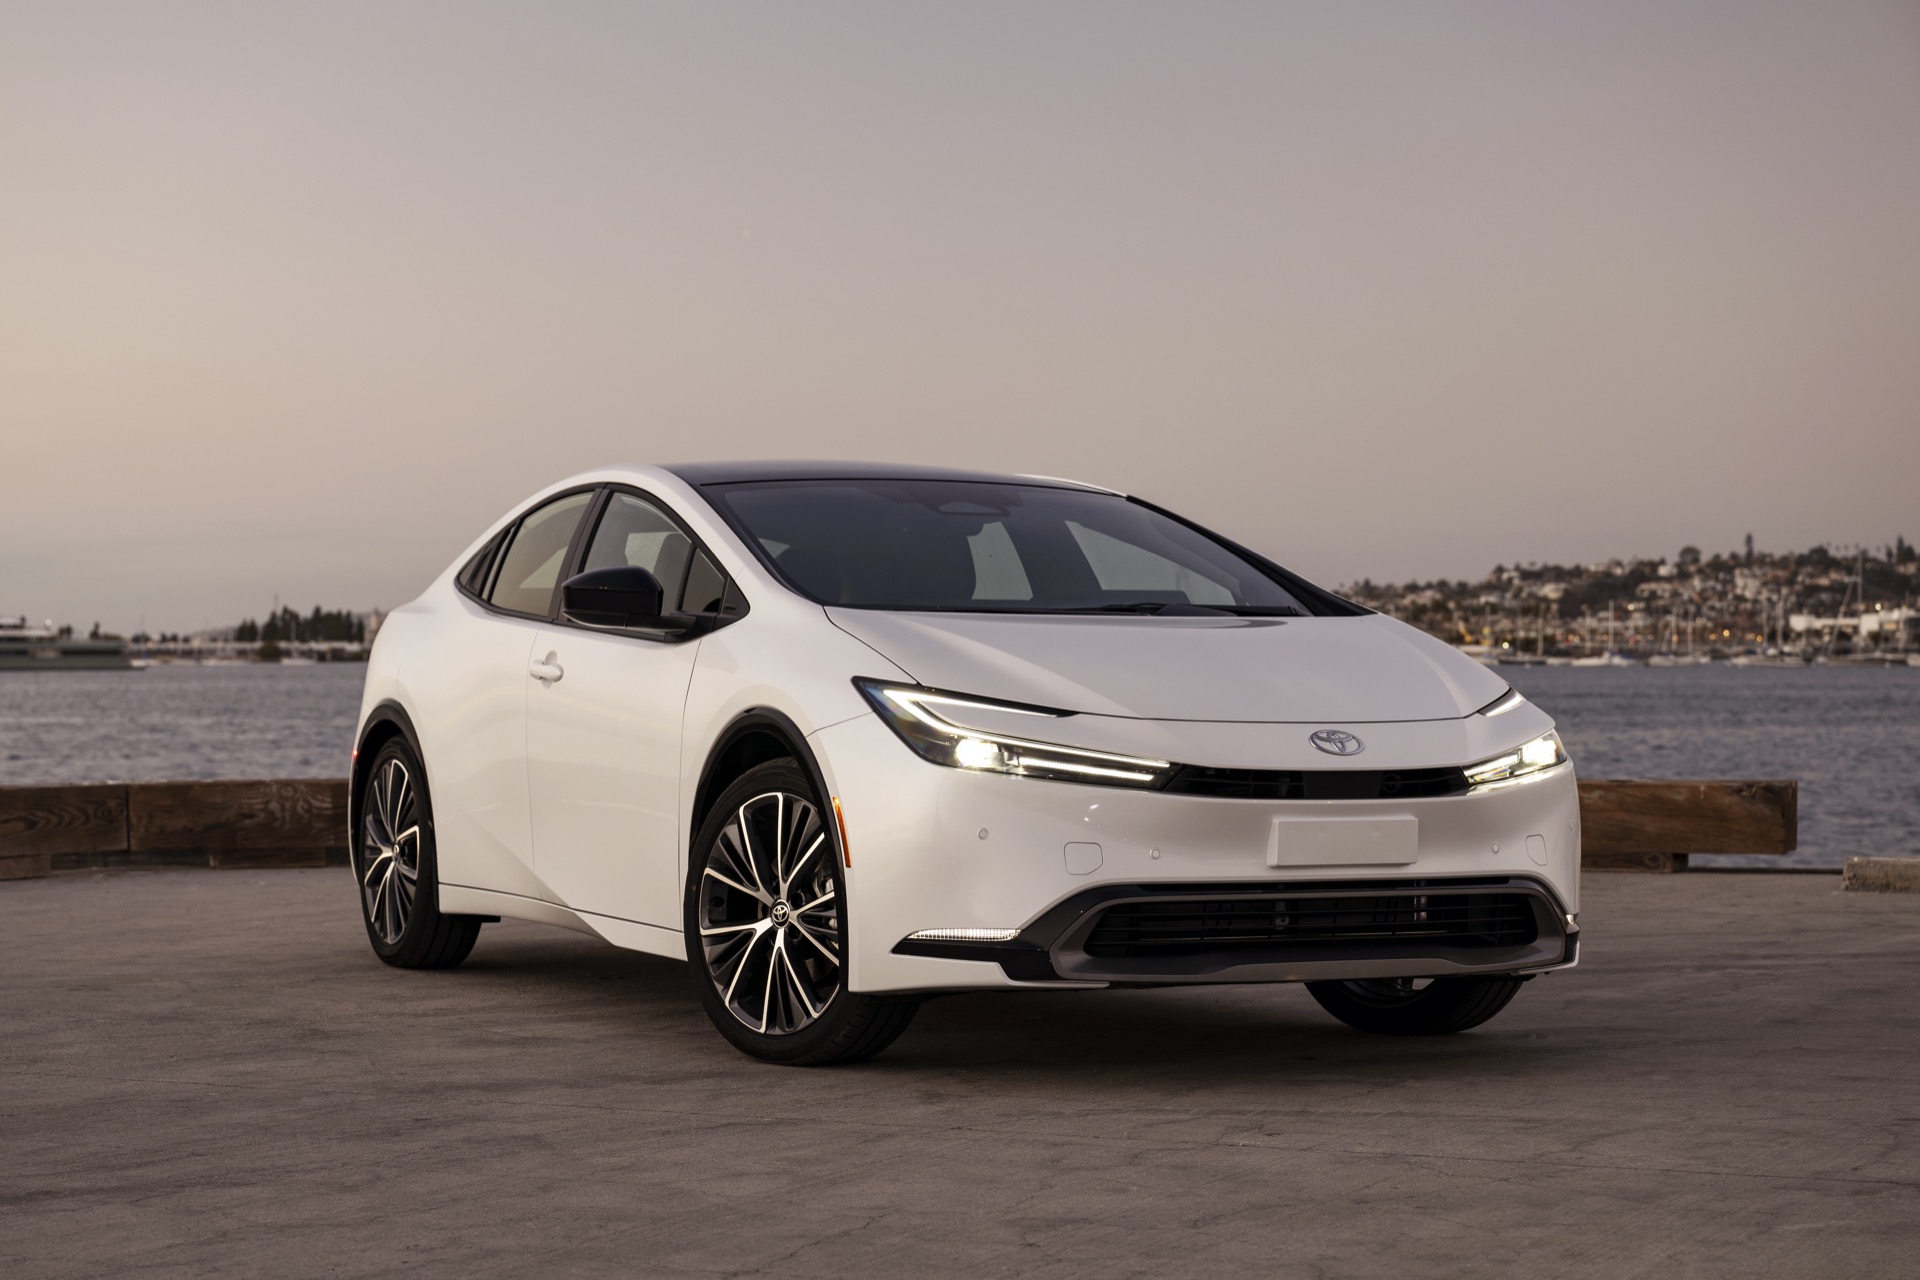 Toyota recasts hybrids without charge ports as hybrid EVs